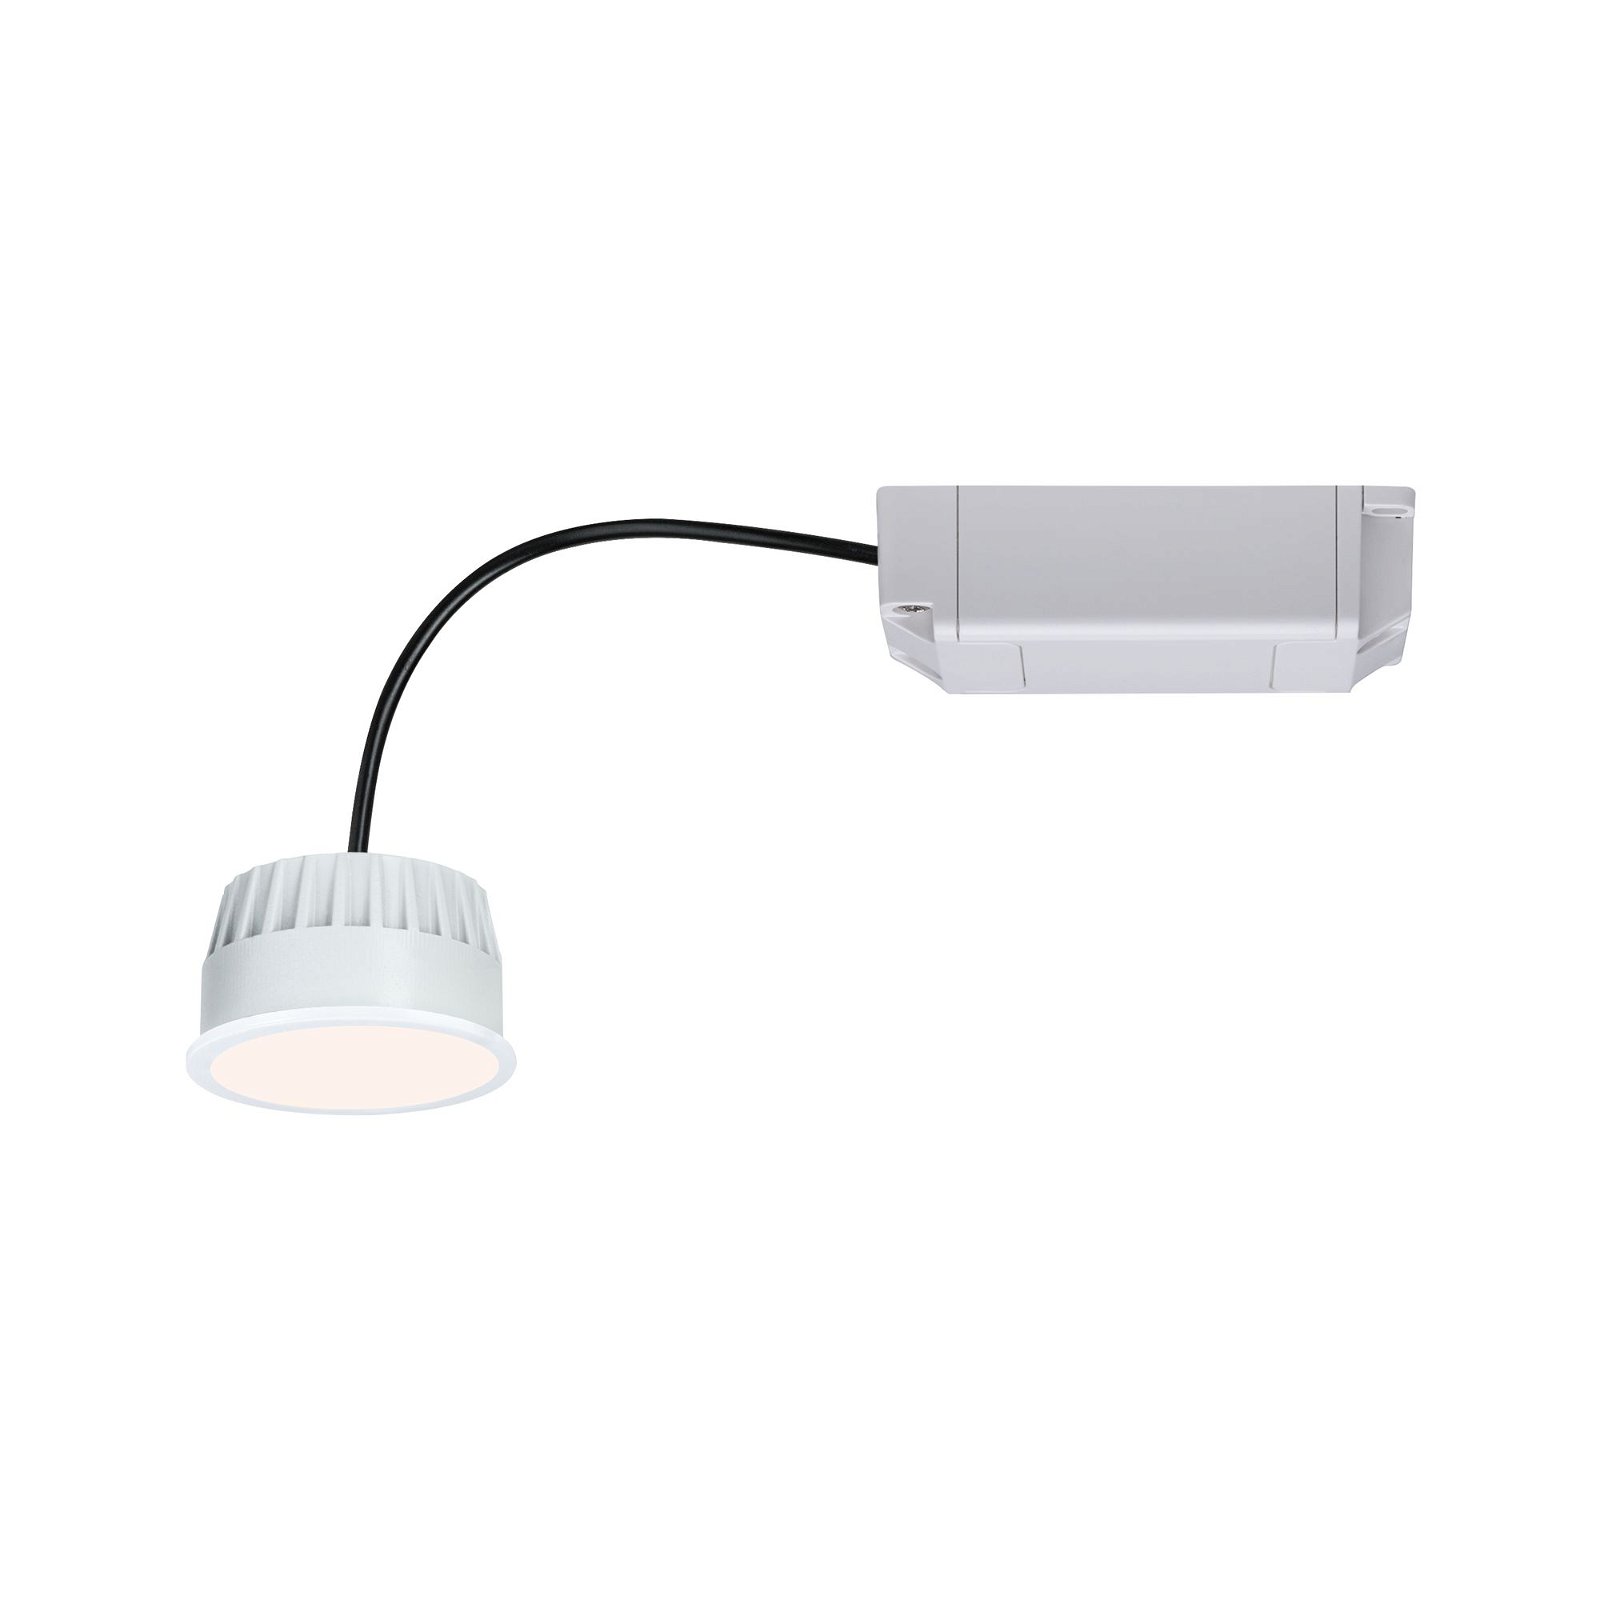 LED Module recessed luminaire Smart Home Zigbee Warm white Coin round 51mm Coin 6W 470lm 230V dimmable 2700K Satin